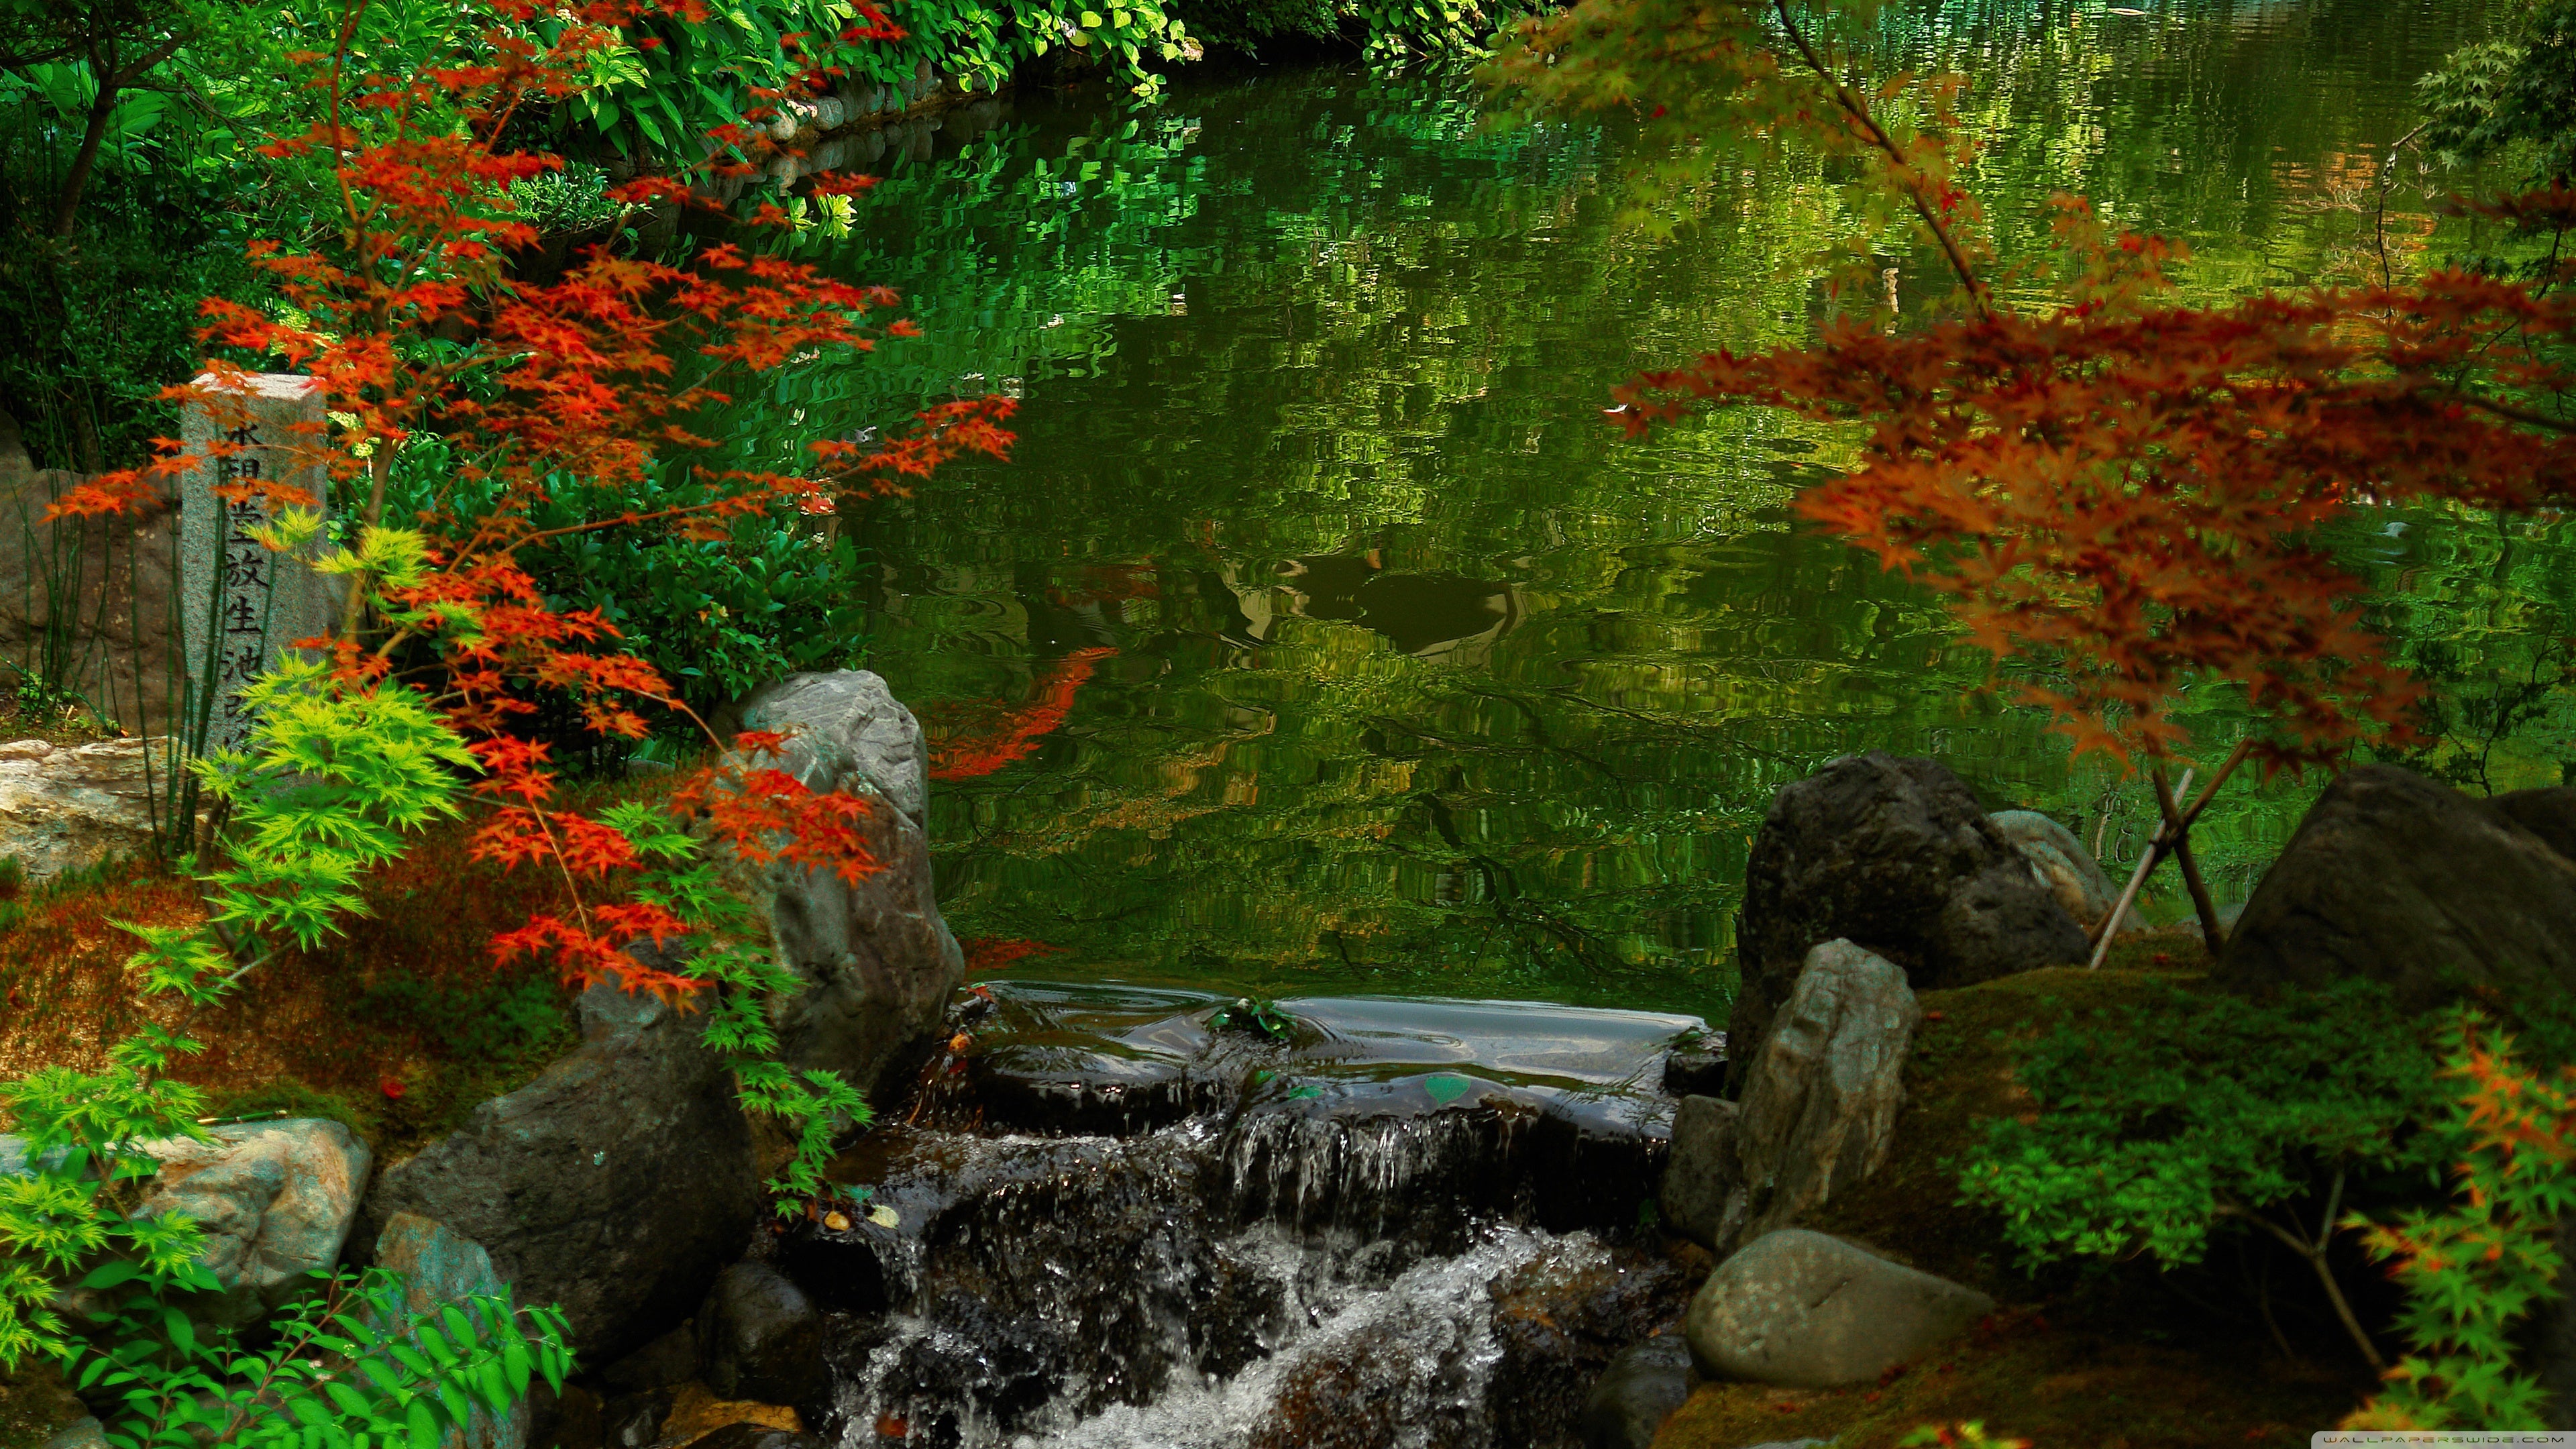 Kyoto 4k Wallpapers For Your Desktop Or Mobile Screen Free And Easy To Download